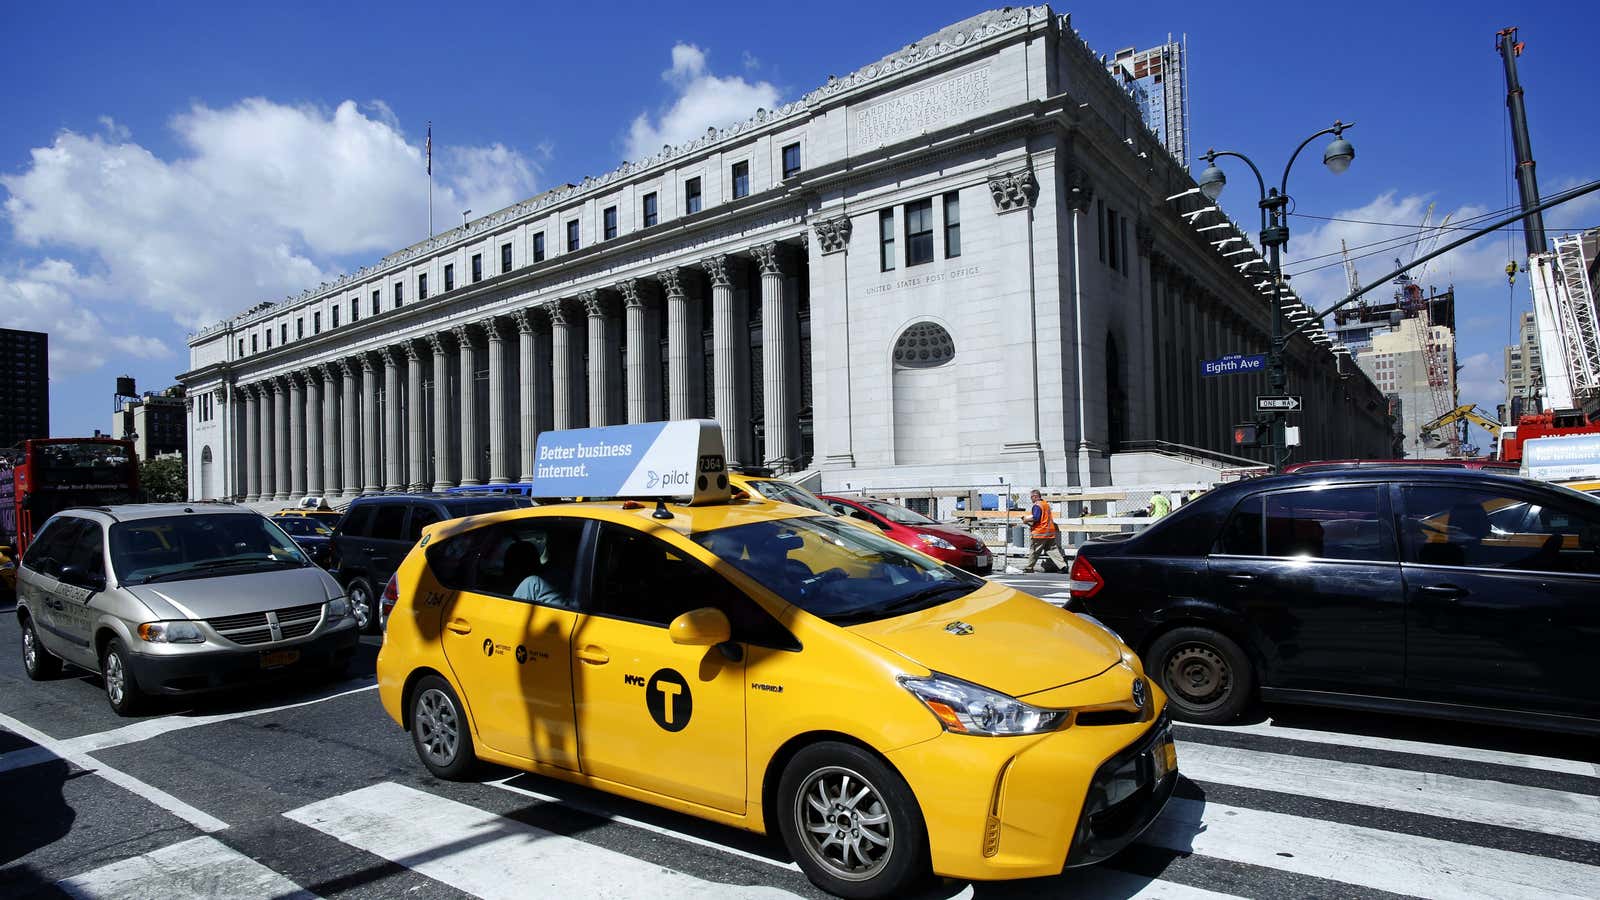 A taxi driver drives past the James A Farley post office building in New York.